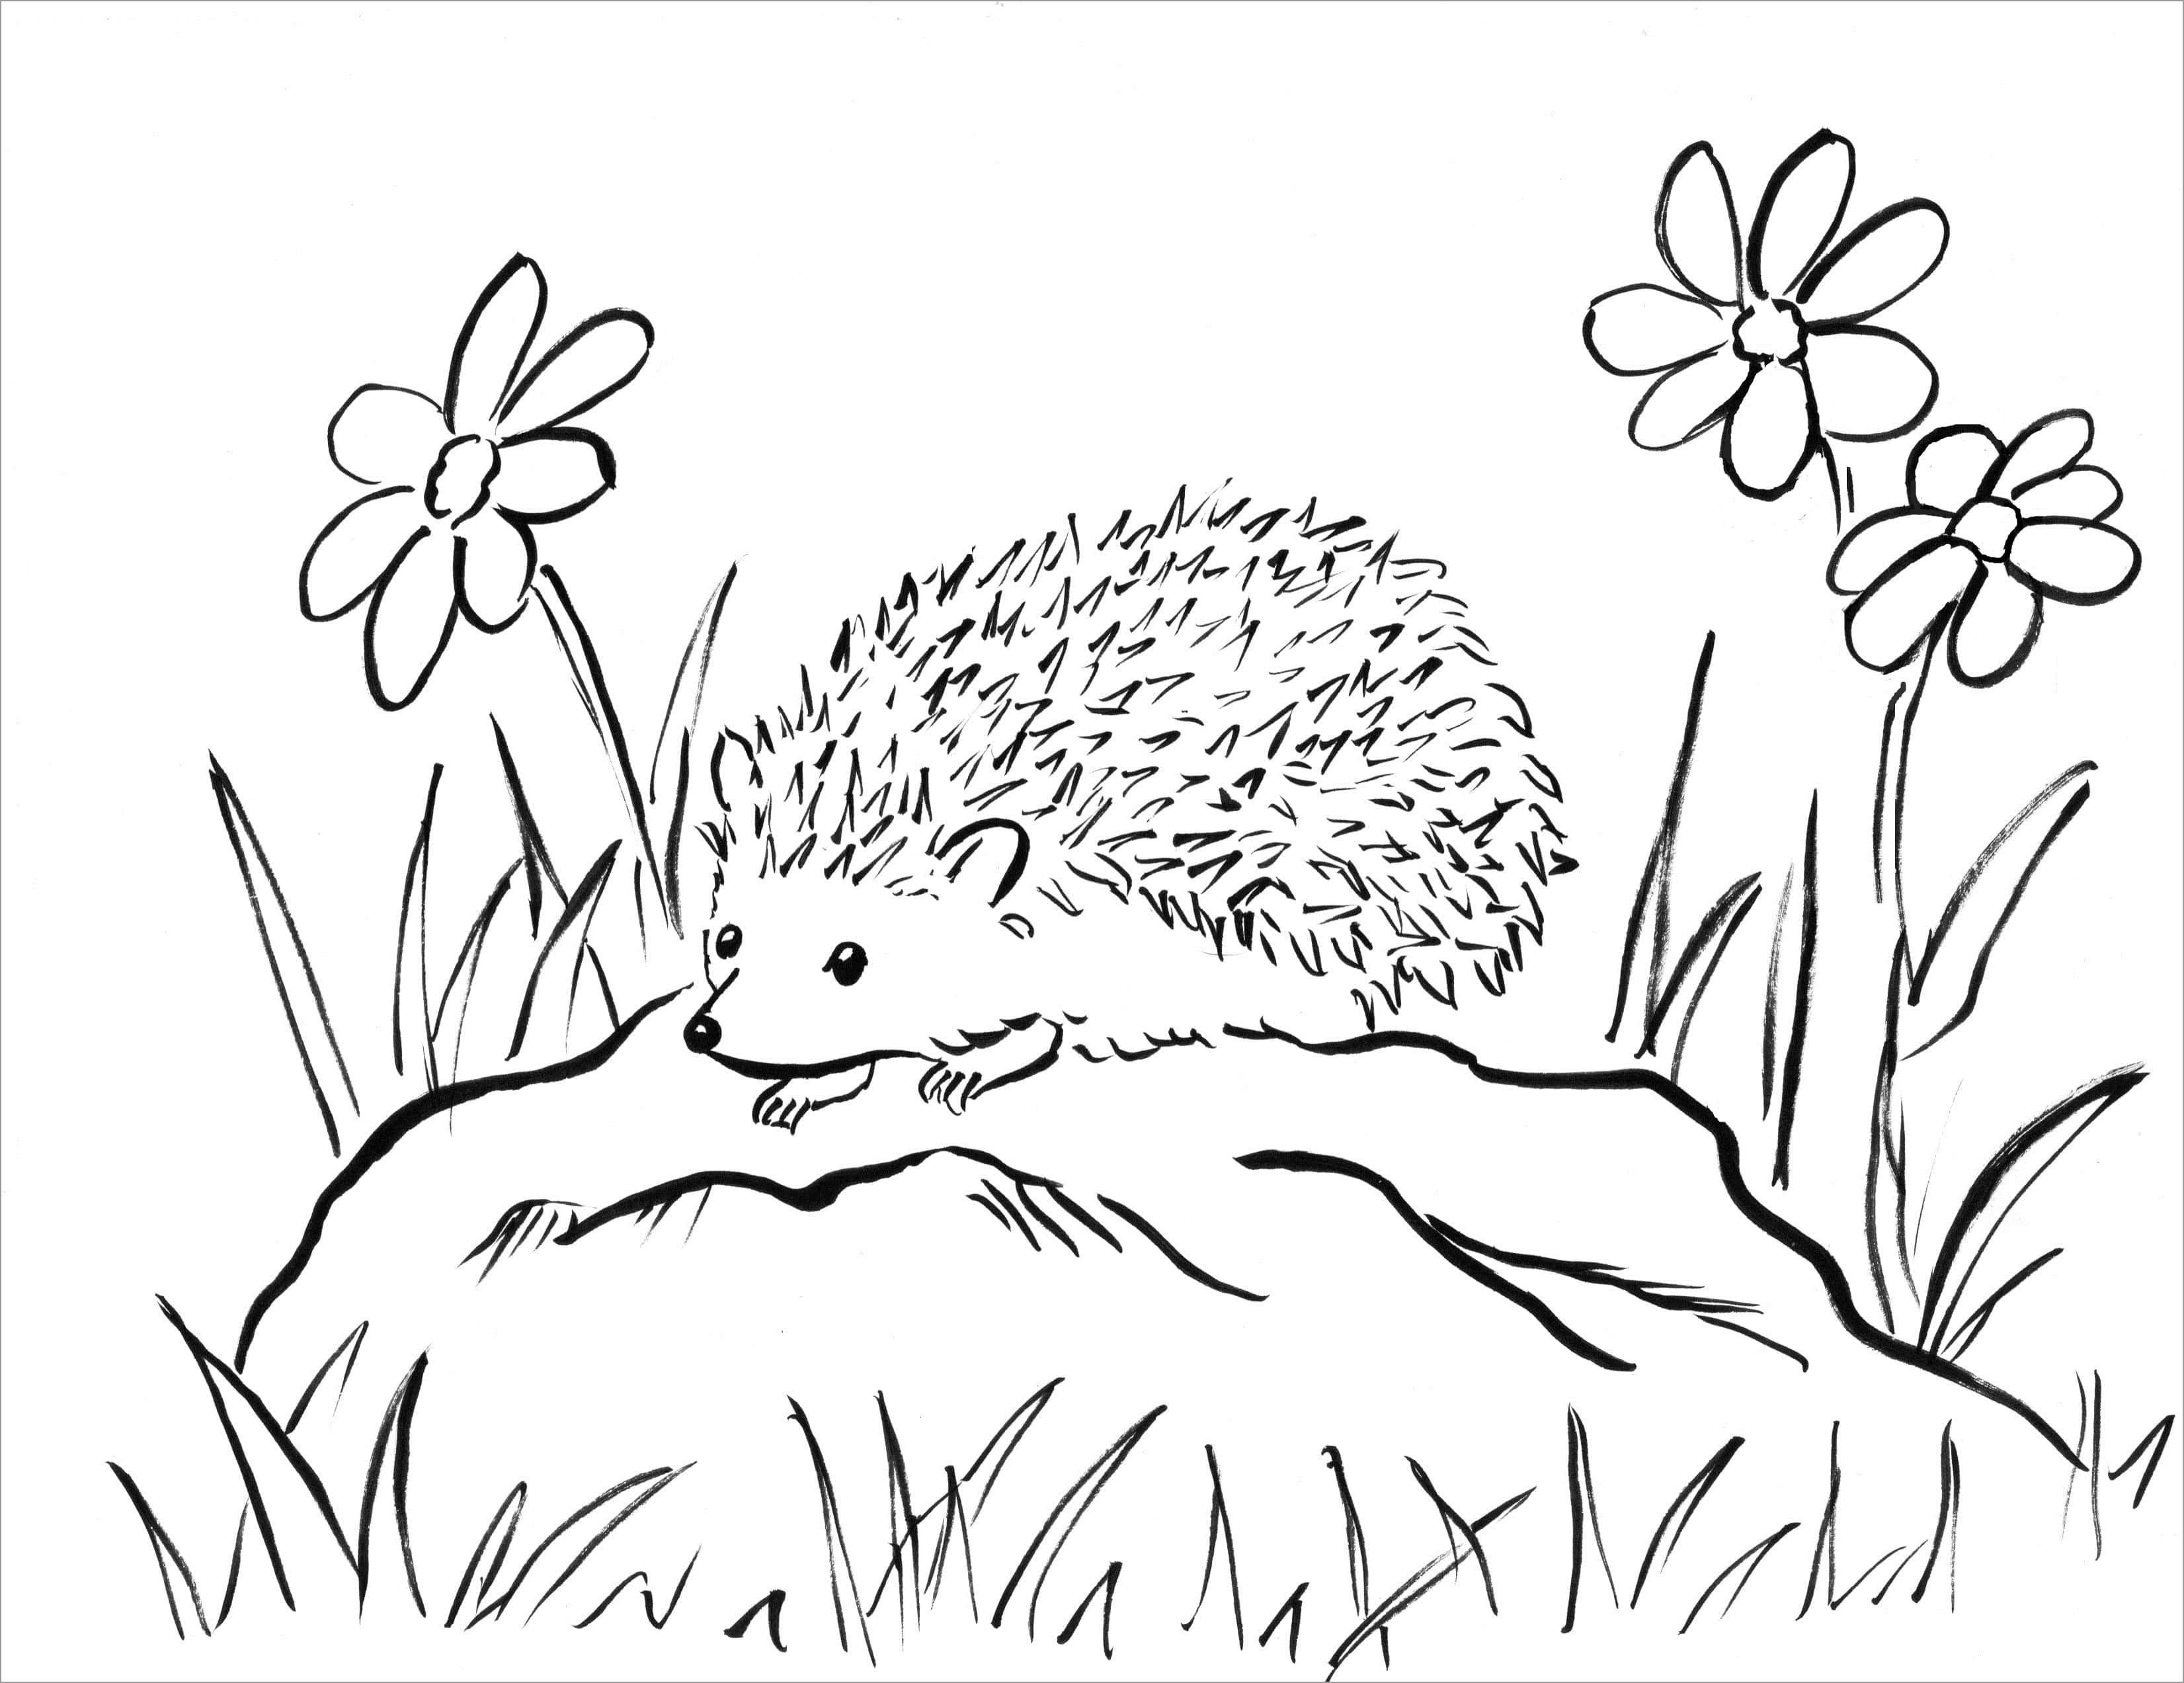 Printable Coloring Page Of A Porcupine